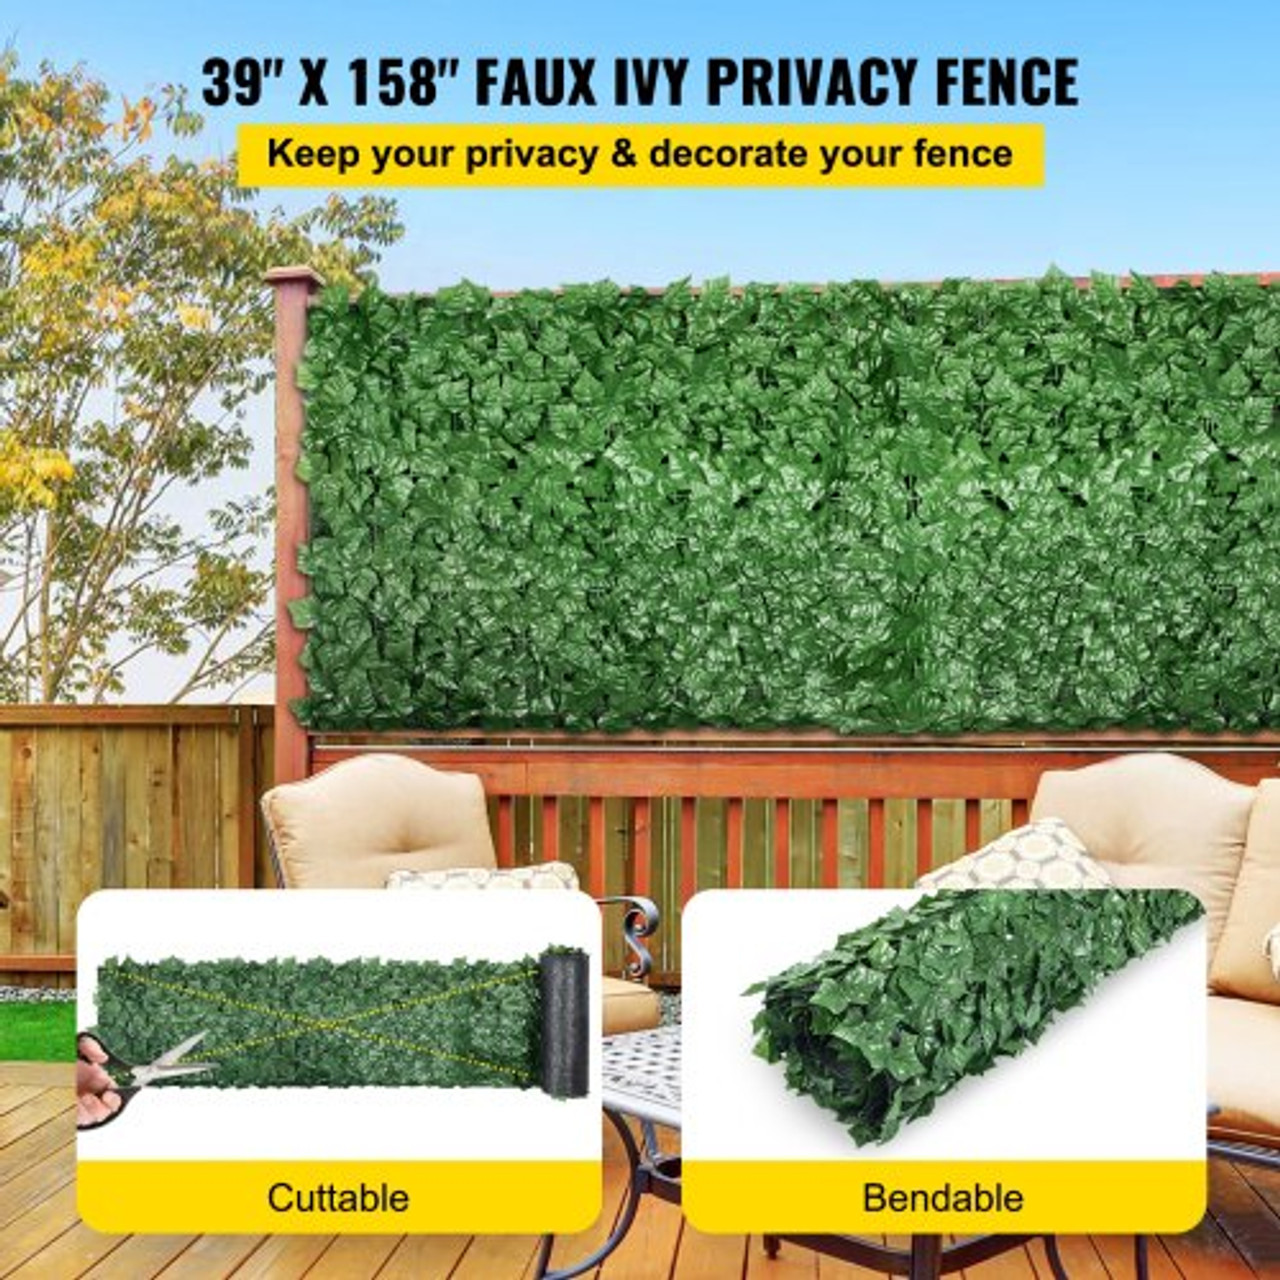 Artificial Ivy Privacy Fence Screen, 39"x158" Ivy Fence, PP Faux Ivy Leaf Artificial Hedges Fence, Faux Greenery Outdoor Privacy Panel Decoration for Garden, Decor, Balcony, Patio, Indoor